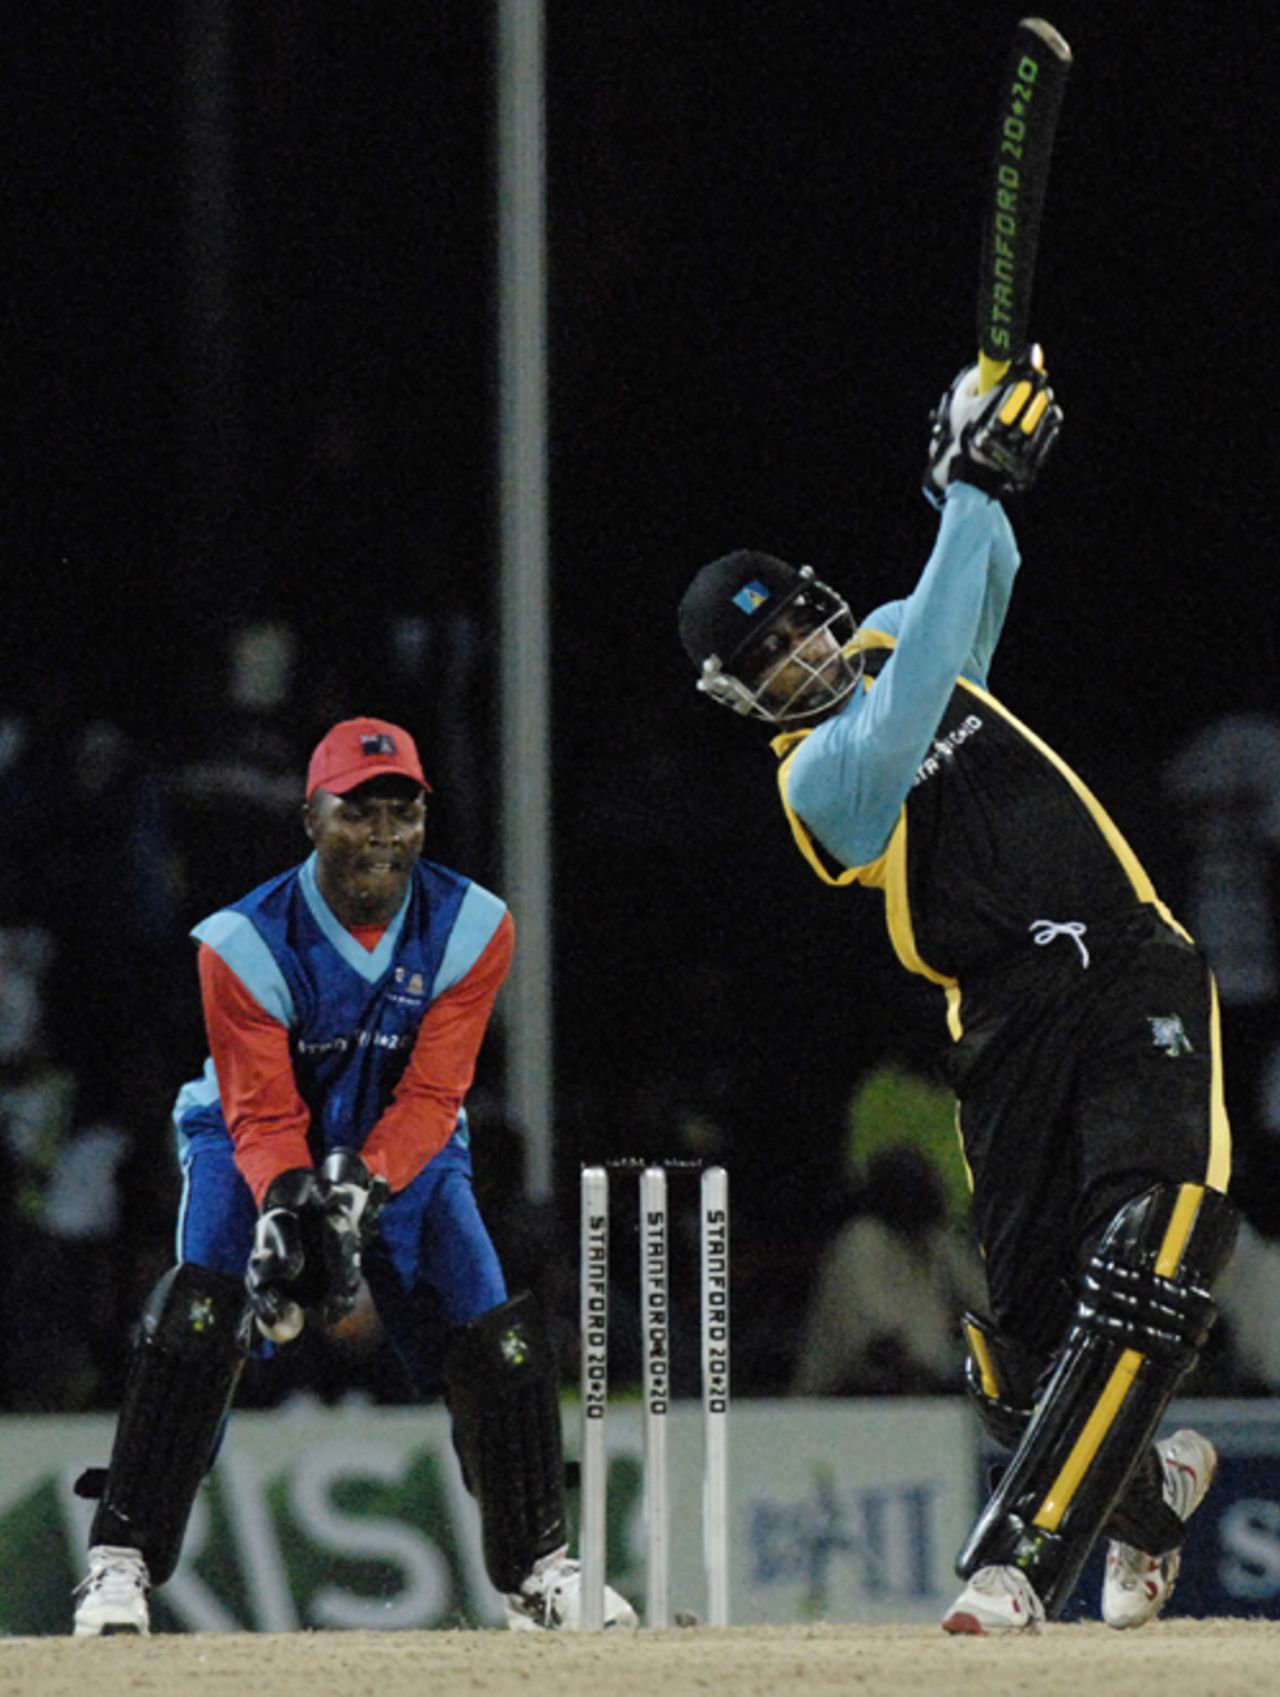 Cletus Mathurin powers the ball down the ground during his 47-ball 39, Cayman Islands v St Lucia, 2nd match, Stanford 20/20, Antigua, January 26, 2008